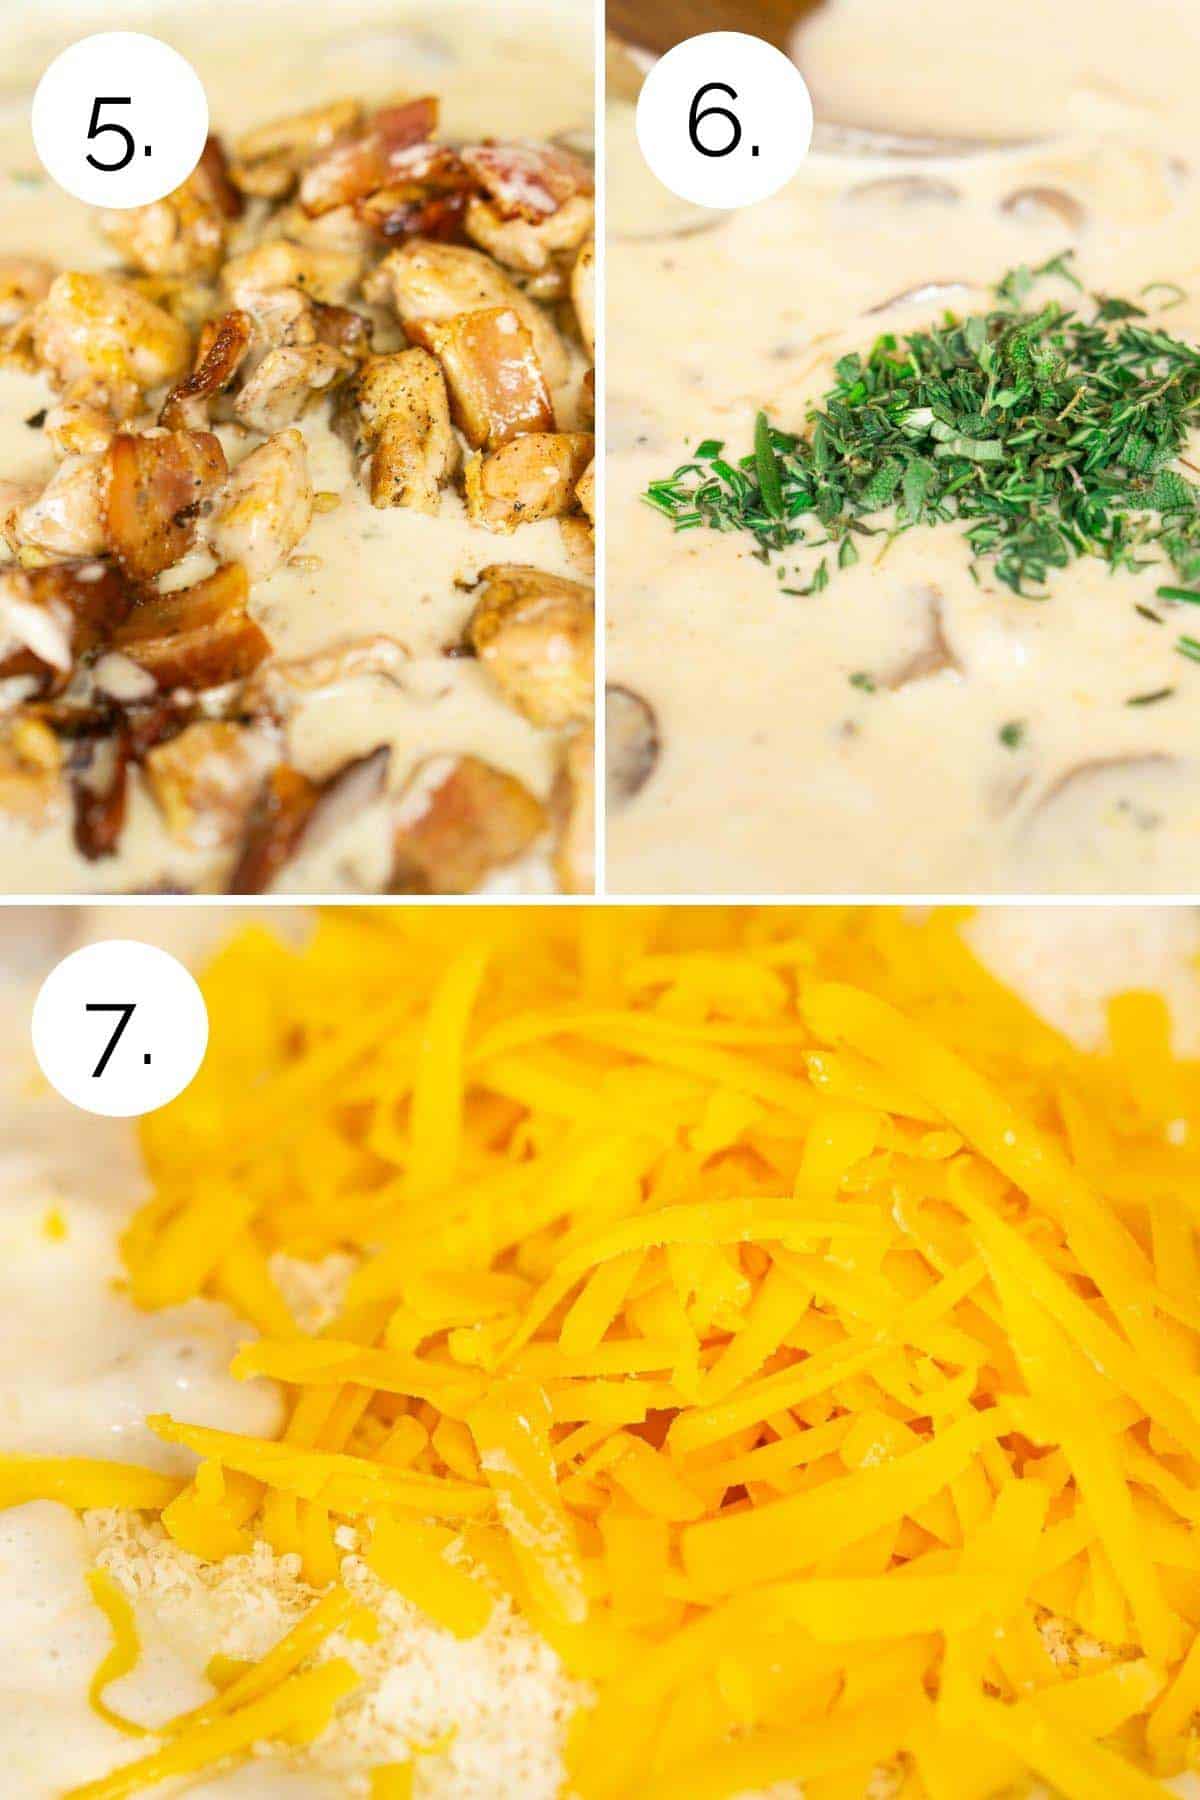 A collage showing the process of adding the mix-ins back to the cream sauce.